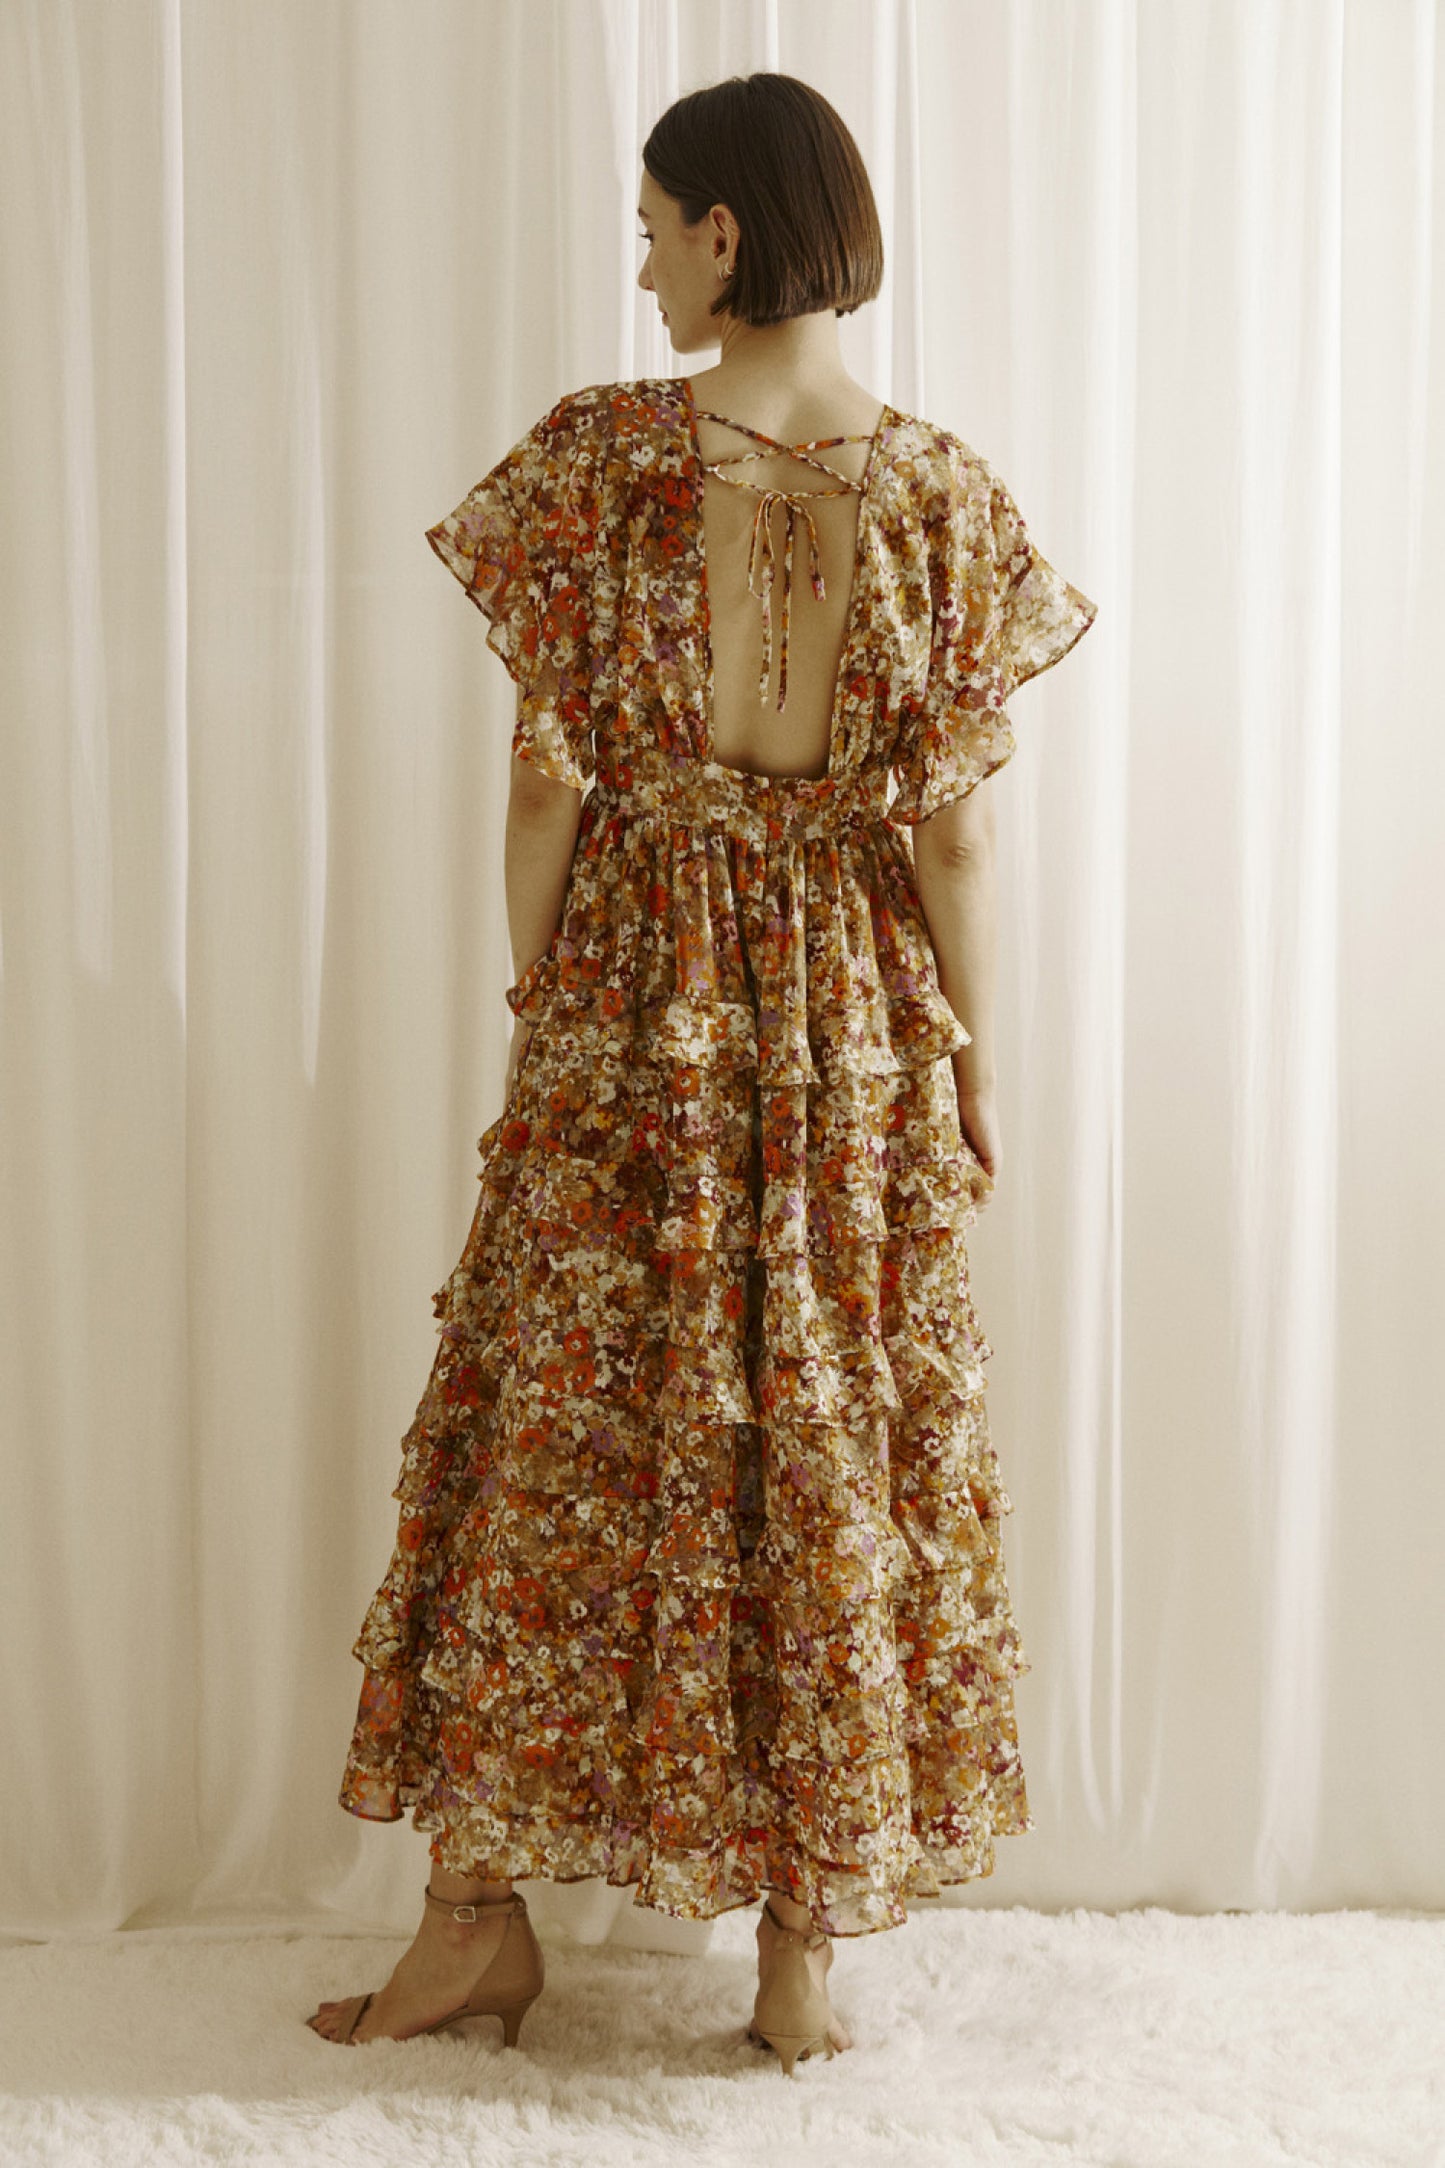 Ditsy floral print midi dress multicolor. Prominent browns, oranges, purples, and maroons.  It shows a deep v-neckline, short fluttered, ruffled sleeves, and a cinched empire waist with center buttons. It also has a ruffled, tiered layered, midi bottom and an open back with a crisscross back tie..  Back full view.